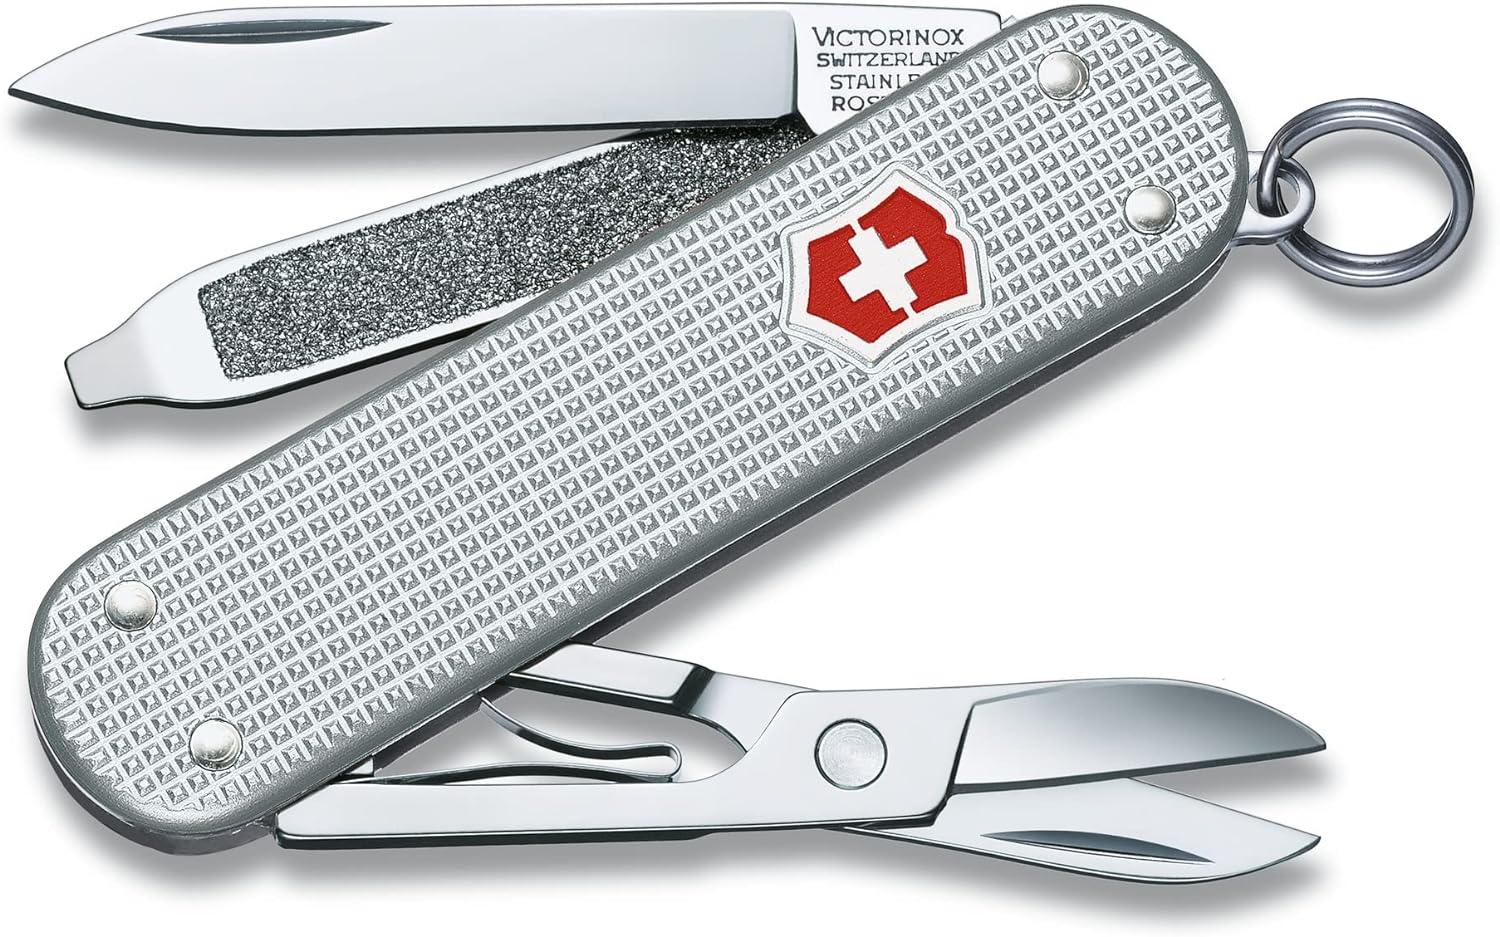 Victorinox Classic SD Swiss Army Pocket Knife for $20.71